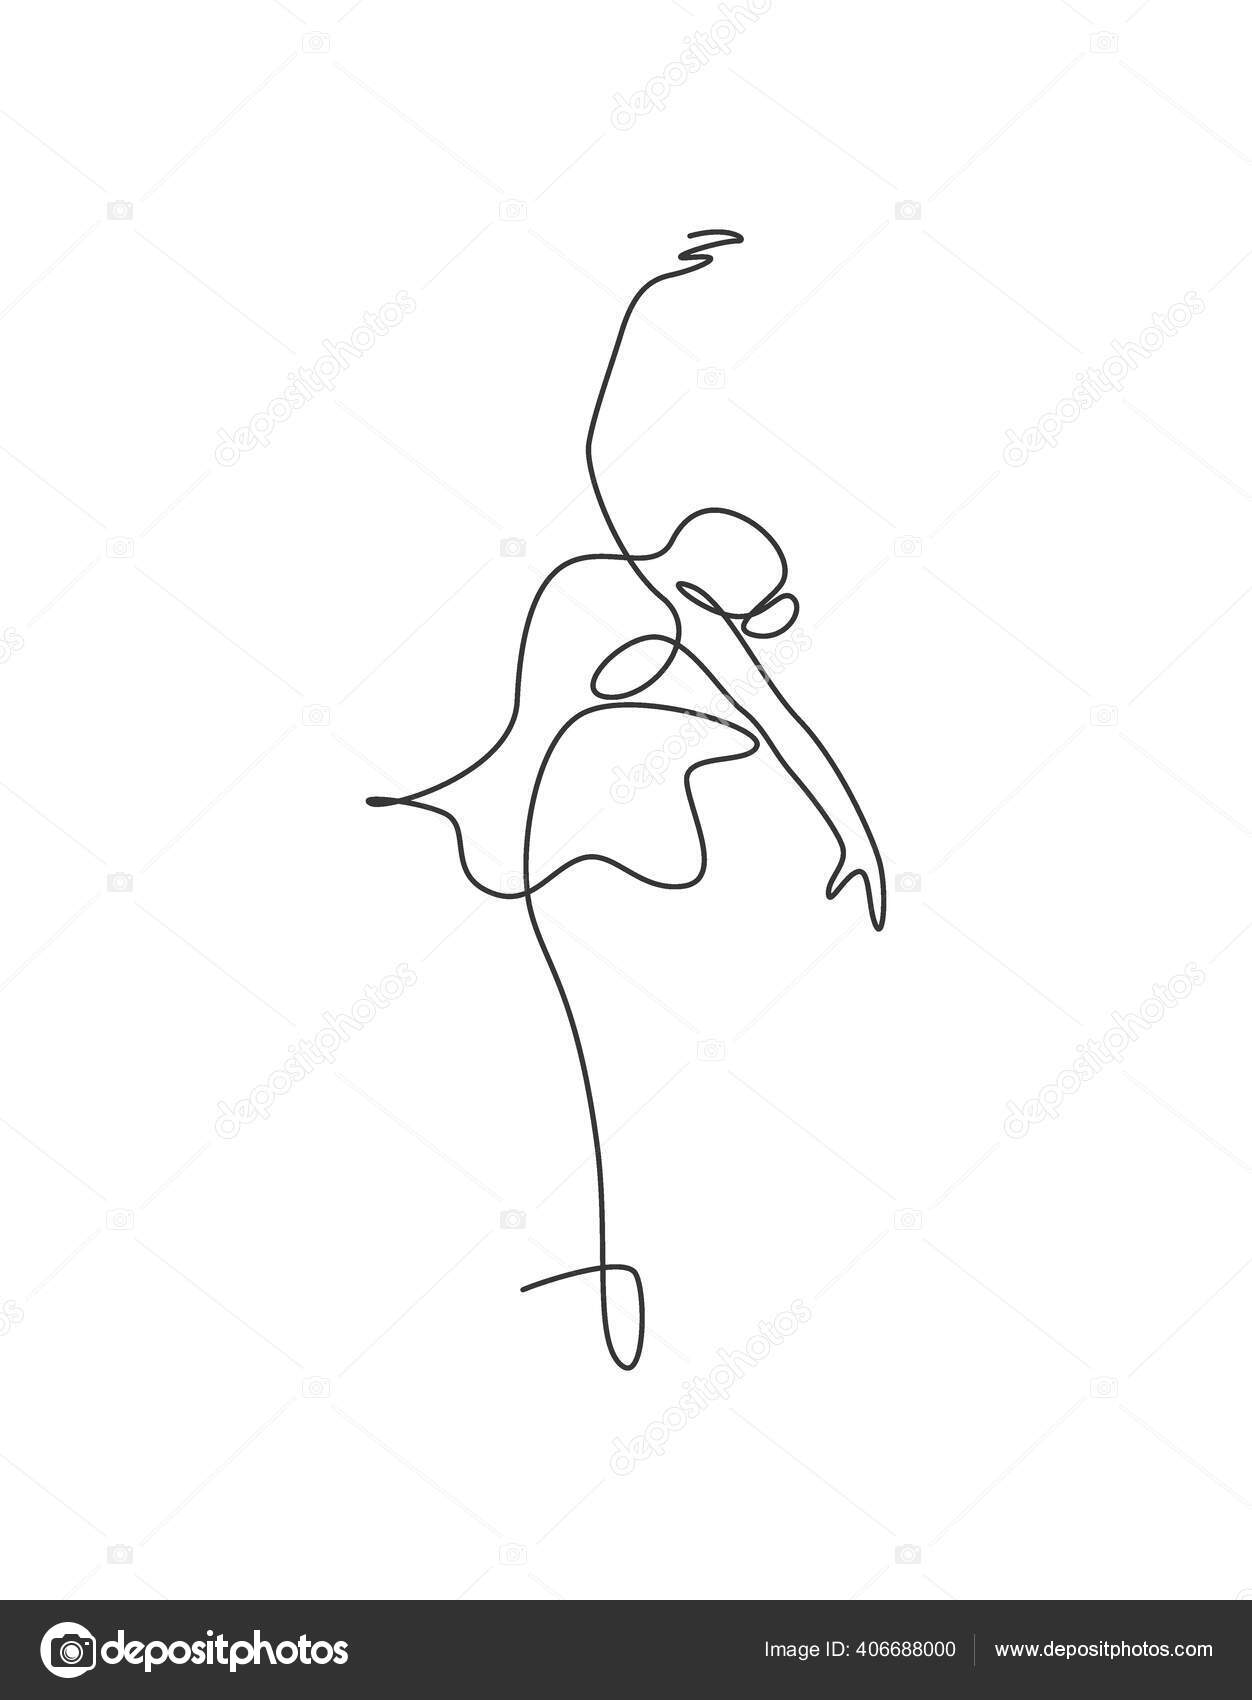 One Continuous Drawing Woman Beauty Ballet Dancer Elegance Motion Vector Image by ©SimpleLine #406688000